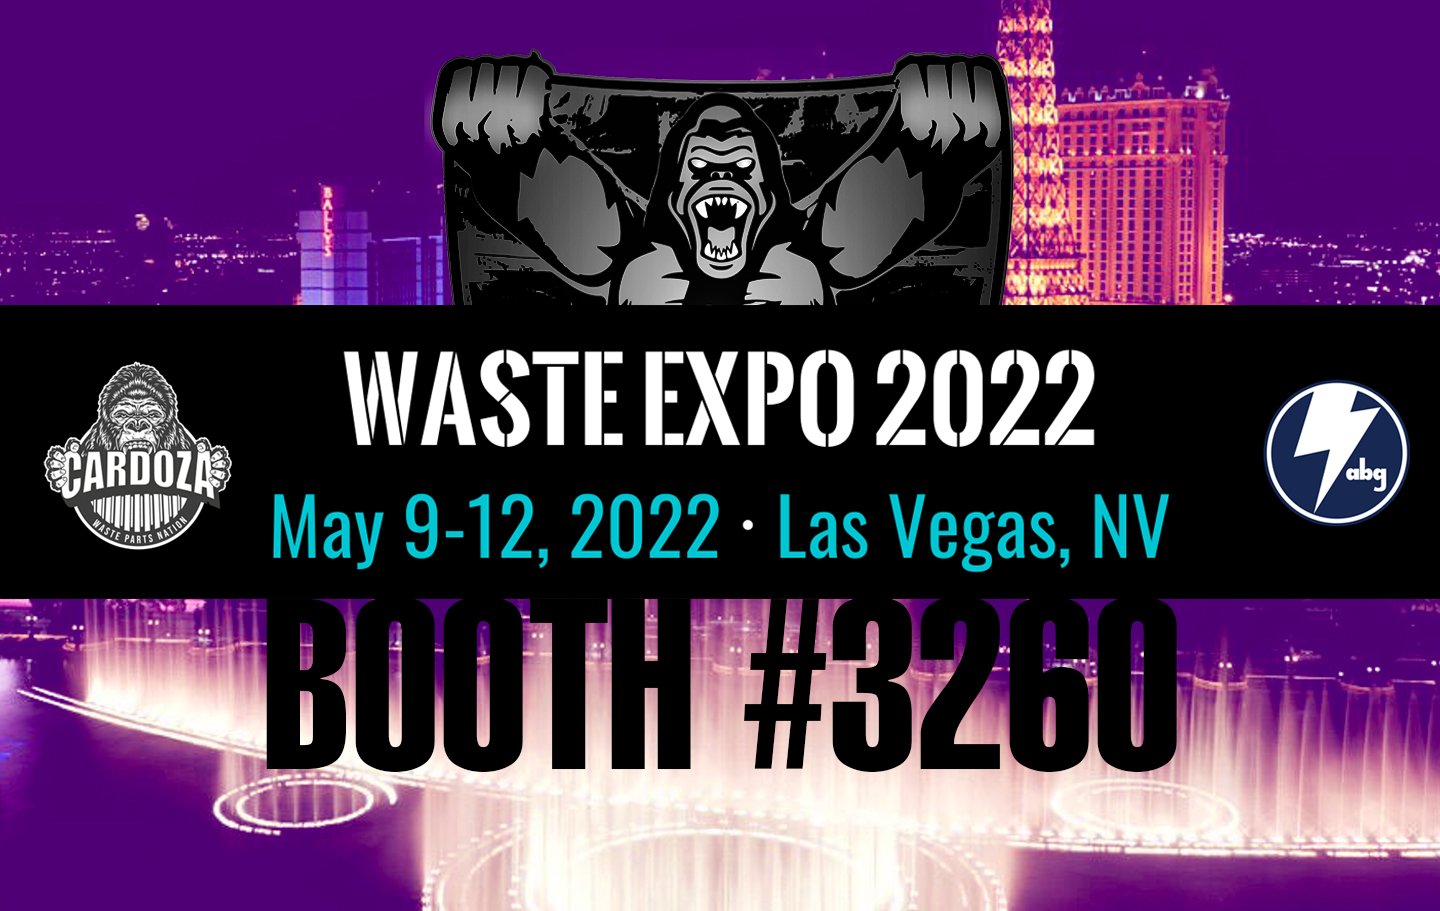 ABG + Cardoza Waste Parts Nation Attend WasteExpo 2022, Booth 3260